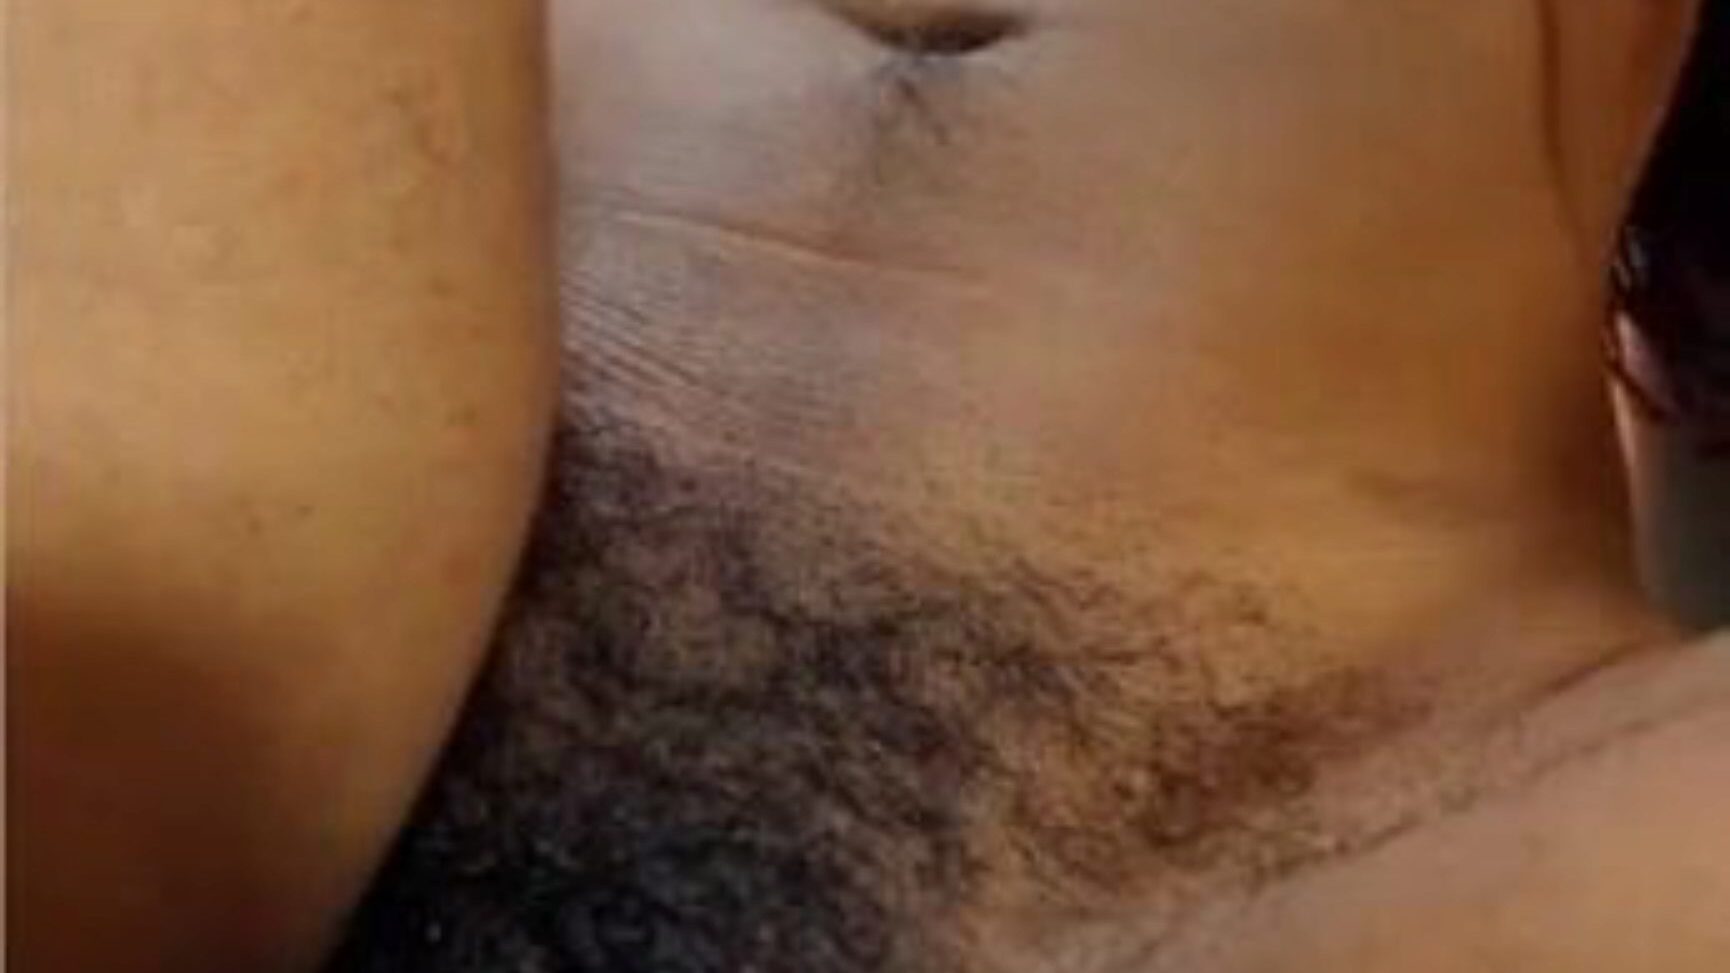 Peludas Mp 004: Free Black Porn Episode ef - xHamster See Peludas Mp 004 tube hook-up movie for free on xHamster, with the sexiest bevy of Black Dilettante & Hirsute porn episode vignettes